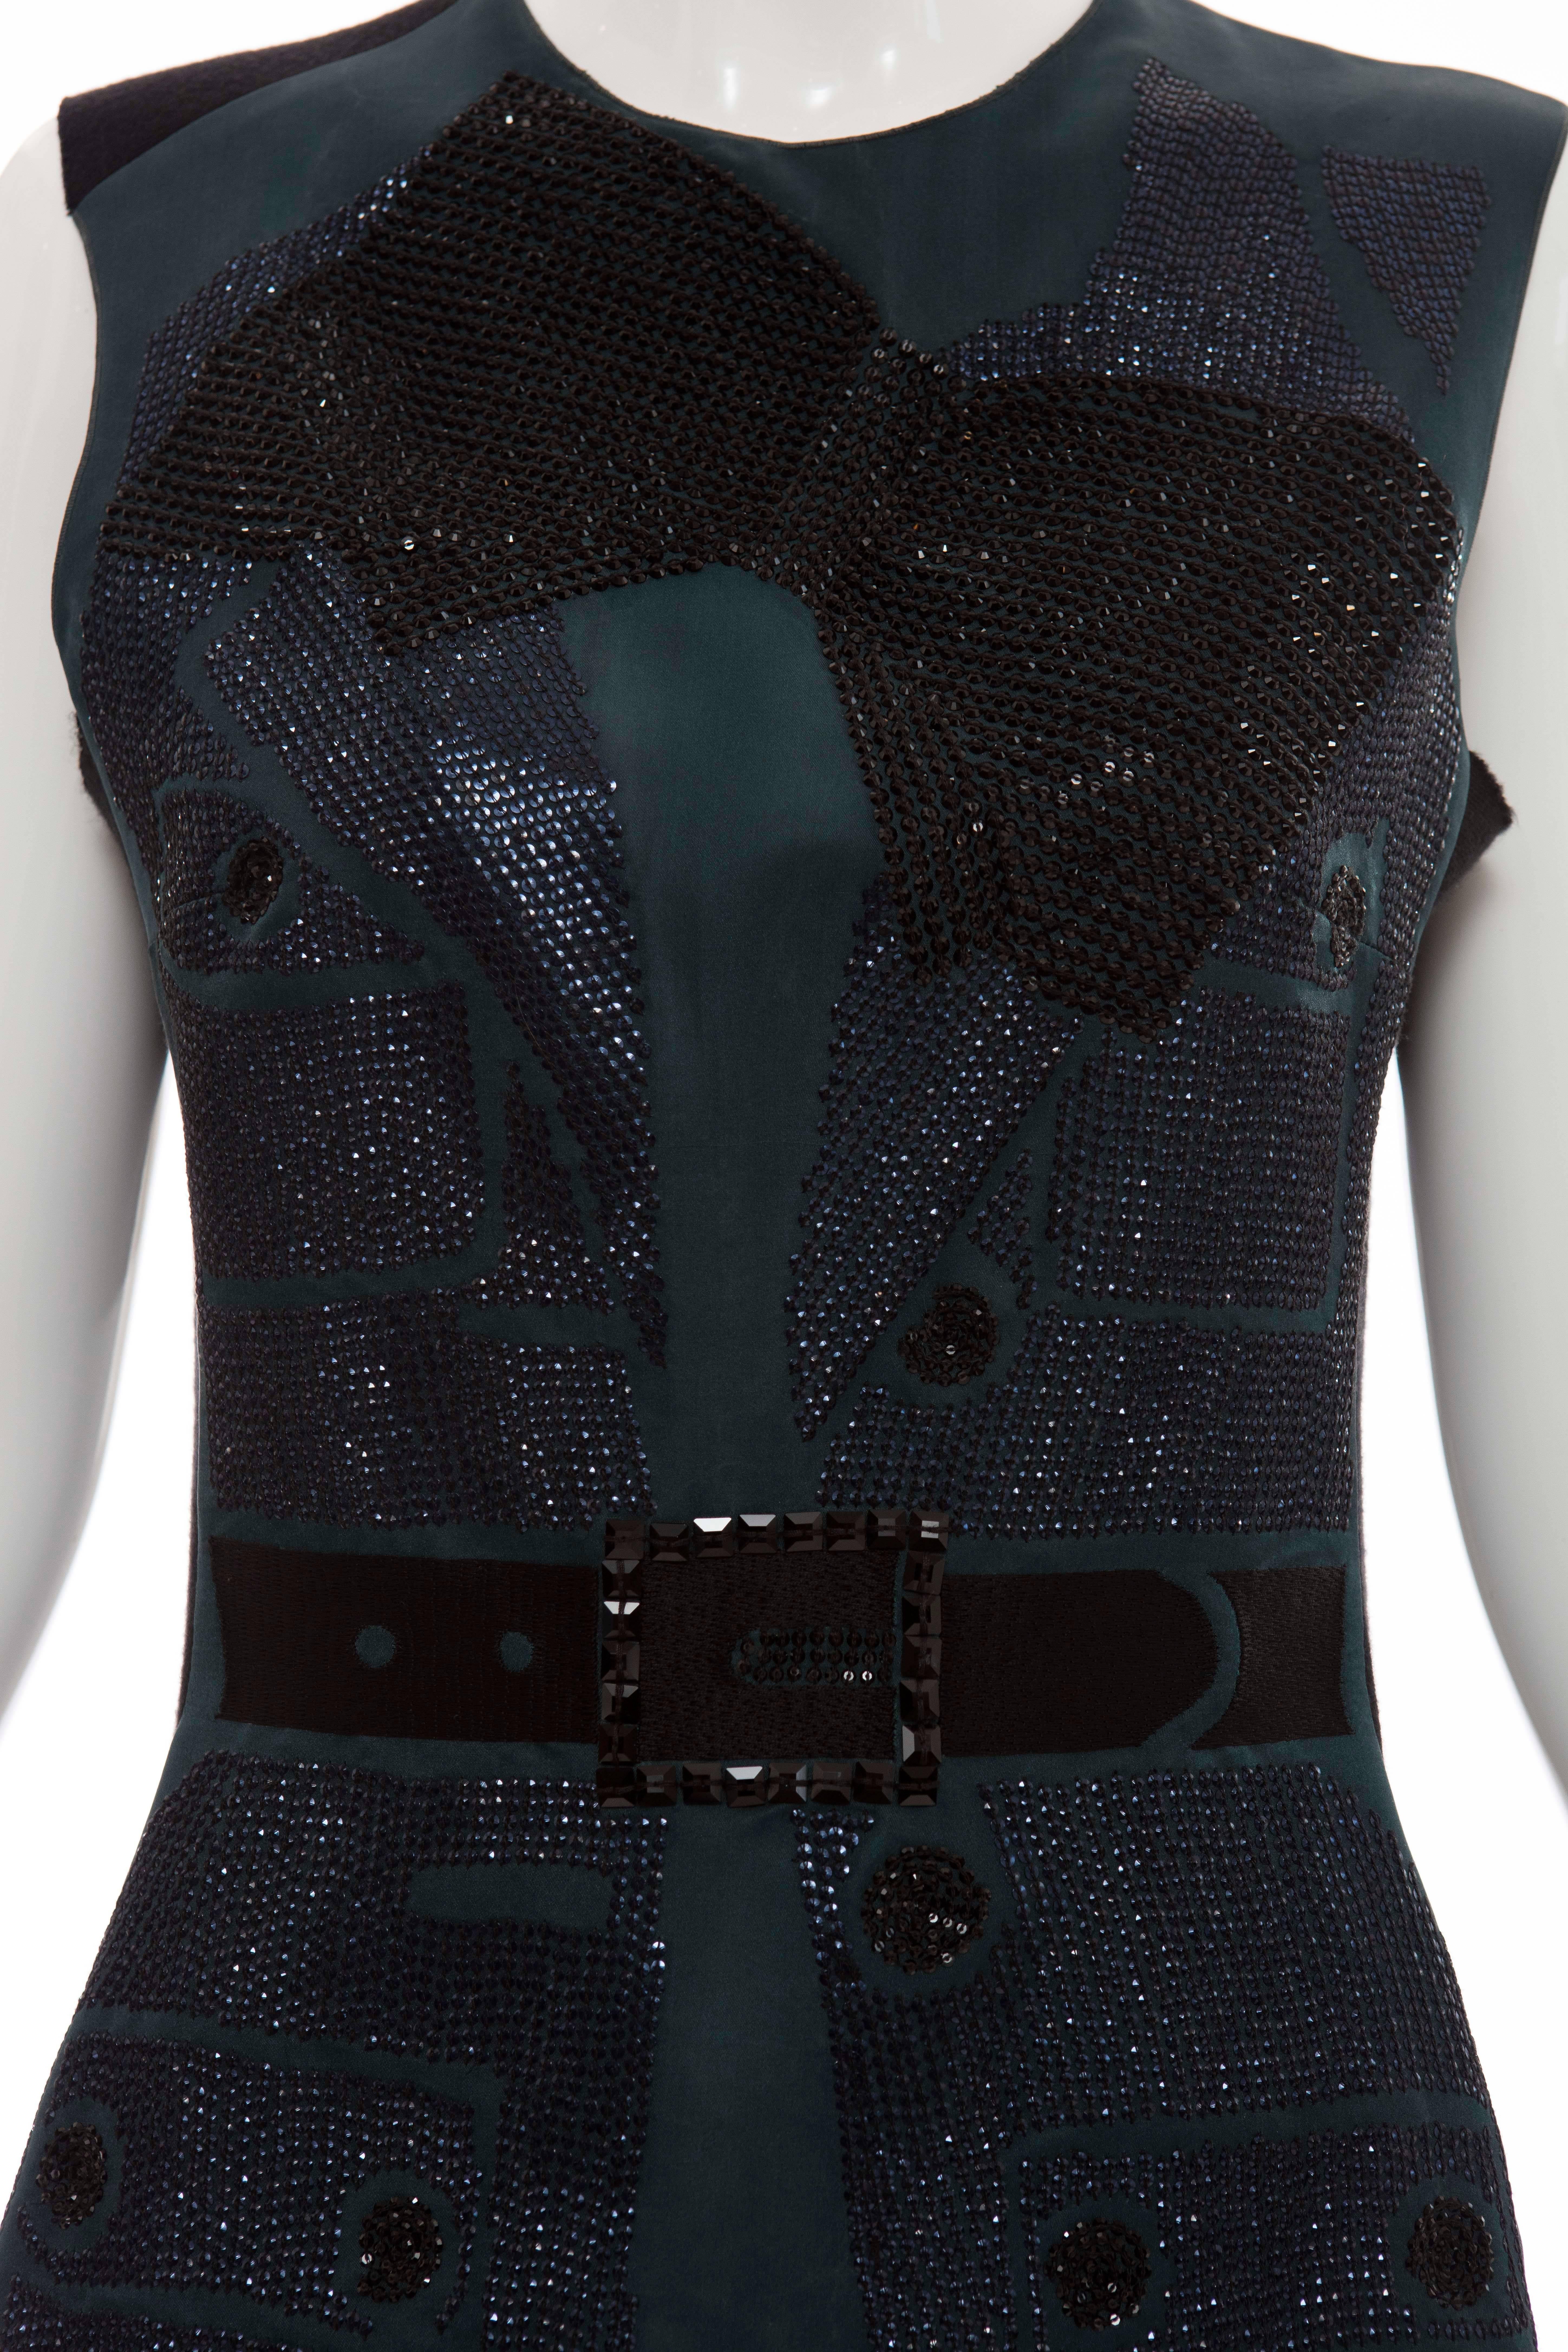 Lanvin By Alber Elbaz Sleeveless Trompe l'oeil  Silk Embellished Top Circa 2006 For Sale 1